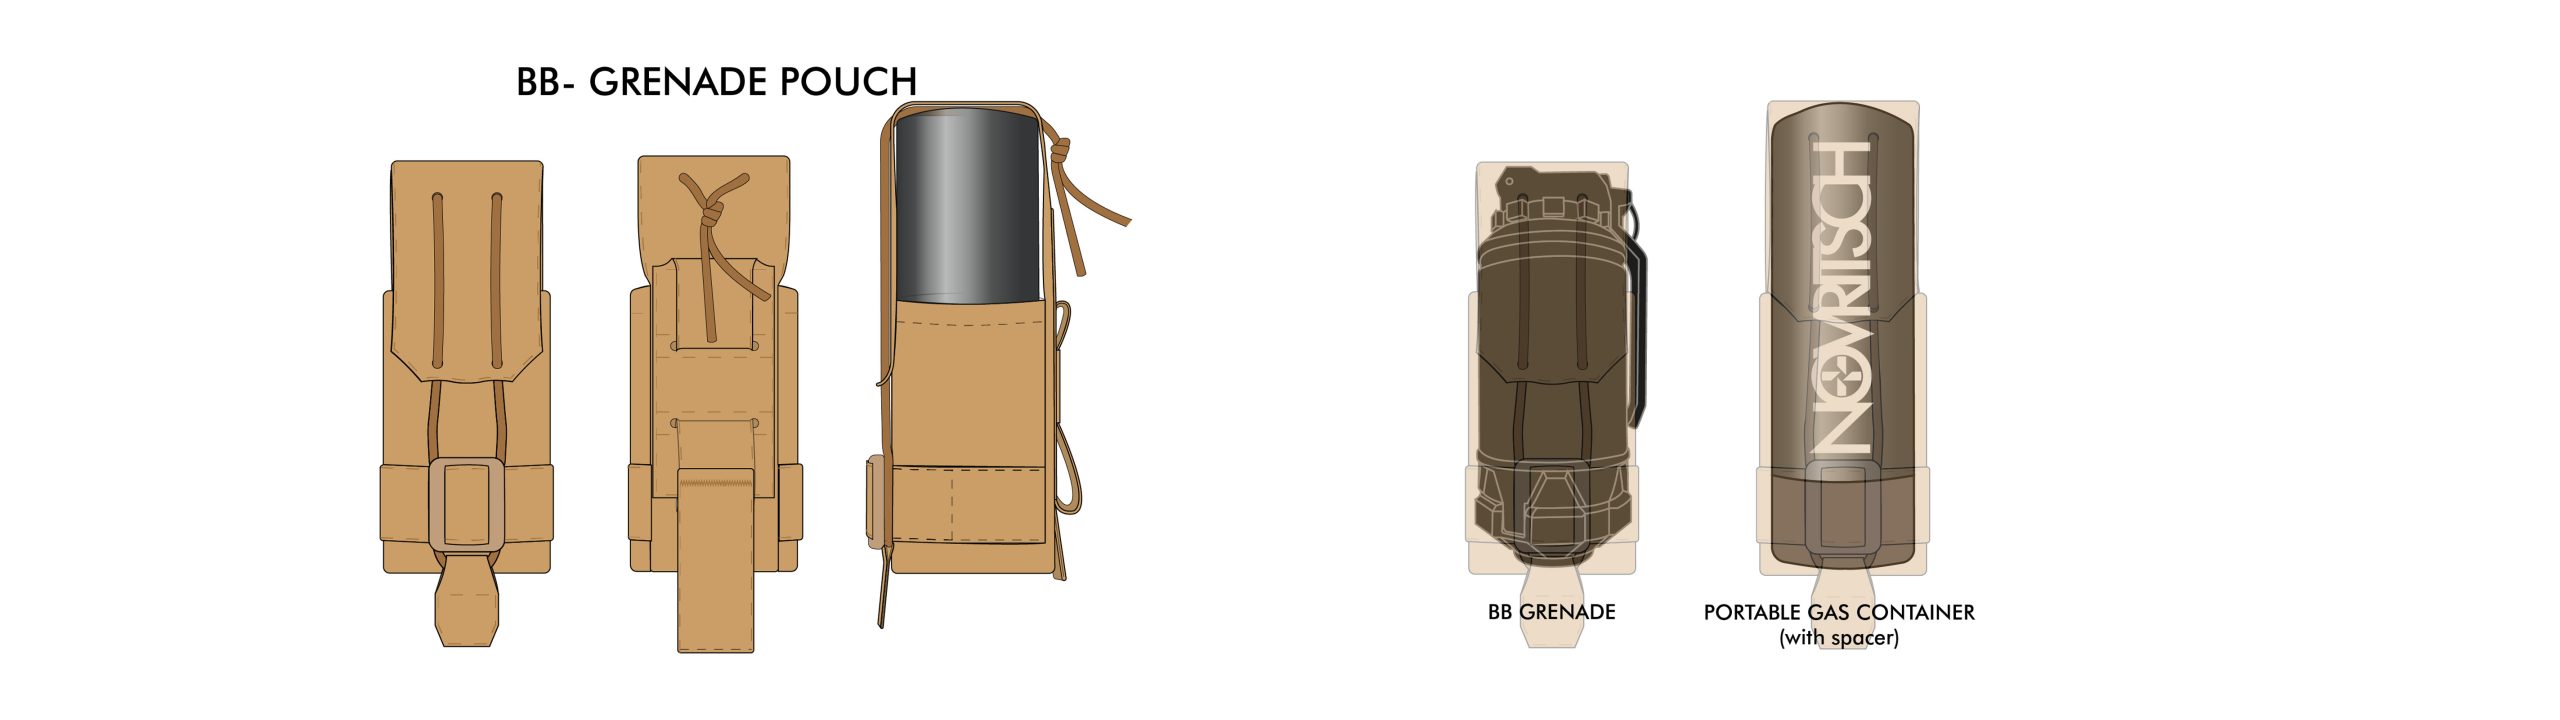 Pouch Compatability Chart_BB Grenade Pouch